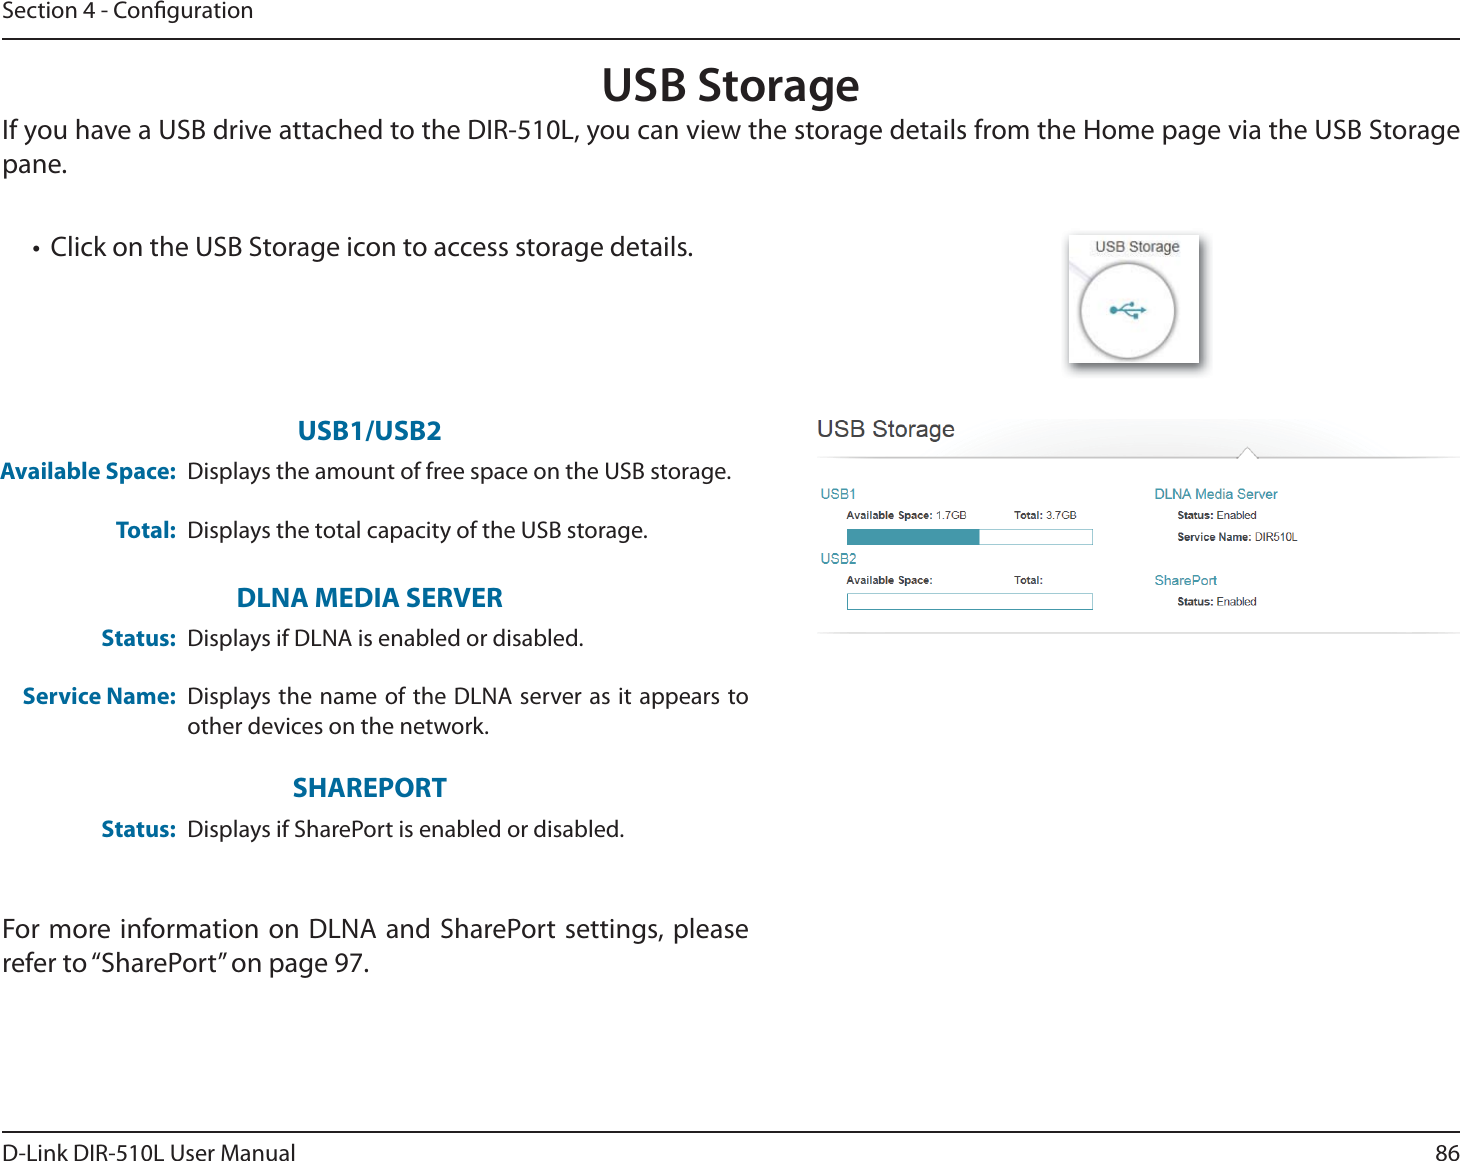 86D-Link DIR-510L User ManualSection 4 - CongurationUSB StorageIf you have a USB drive attached to the DIR-510L, you can view the storage details from the Home page via the USB Storage pane.t Click on the USB Storage icon to access storage details.For more information on DLNA and SharePort settings, please refer to “SharePort” on page 97.Available Space:Total:Displays the amount of free space on the USB storage.Displays the total capacity of the USB storage.USB1/USB2Status:Service Name:Displays if DLNA is enabled or disabled.Displays the name of the DLNA server as it appears to other devices on the network.DLNA MEDIA SERVERStatus: Displays if SharePort is enabled or disabled.SHAREPORT